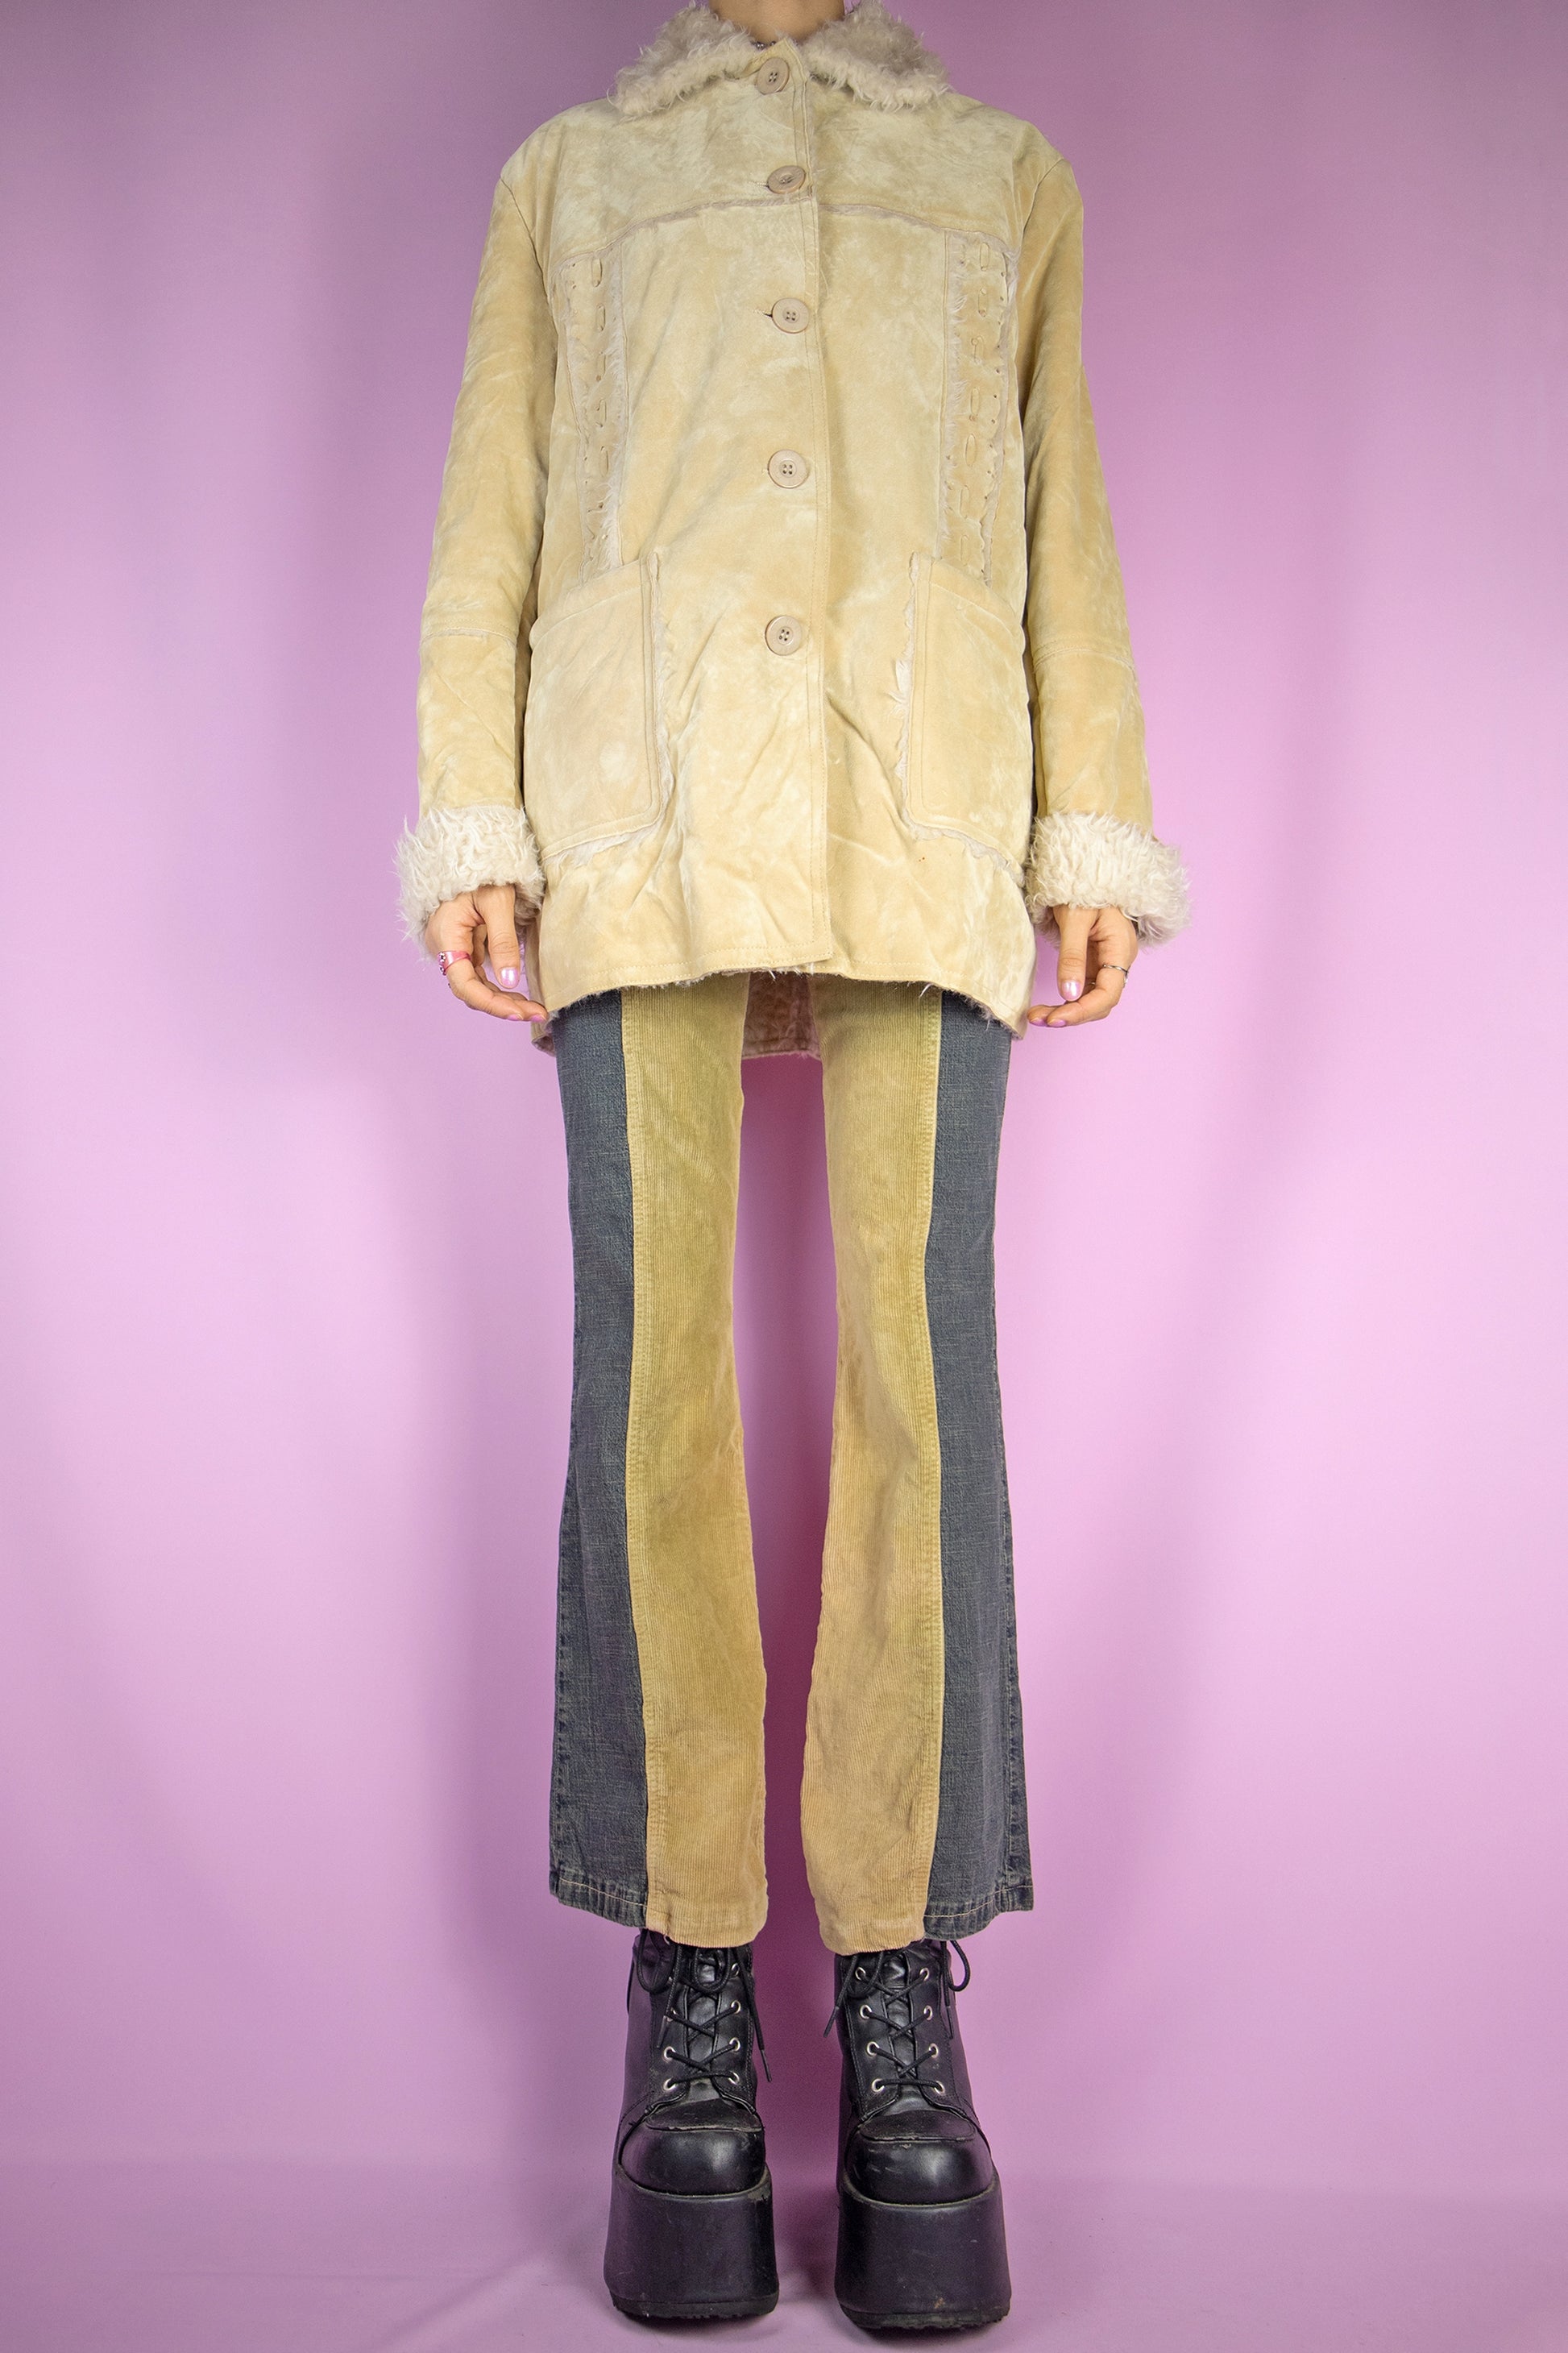 The Y2K Beige Faux Fur Jacket is a vintage beige faux suede jacket with faux fur lining, collar and cuffs, button closure and pockets. Super cute boho grunge cyber 2000s winter statement coat.